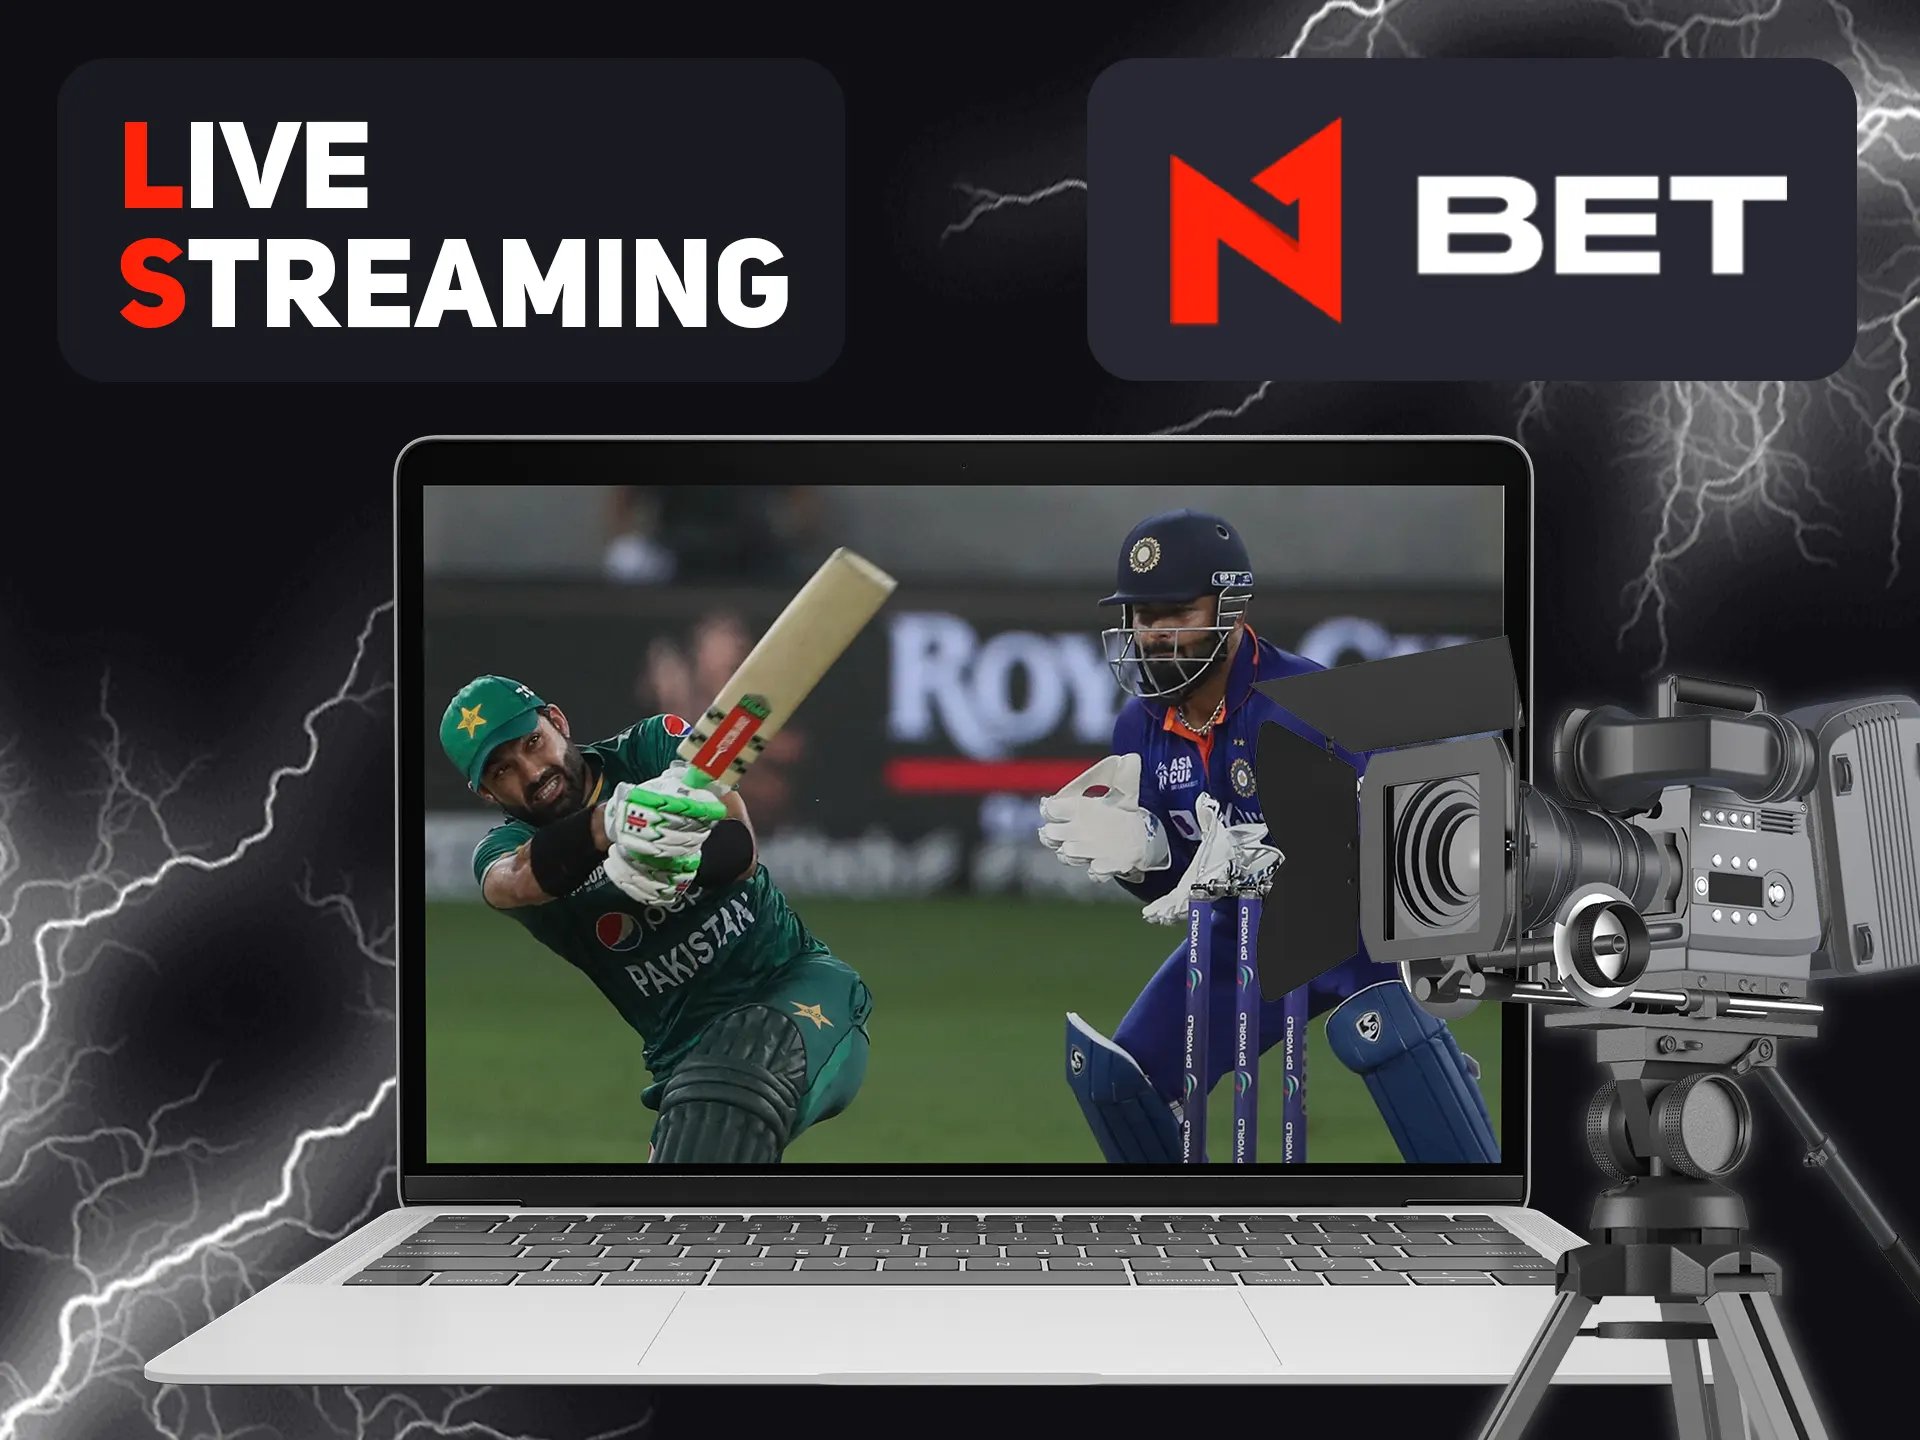 Watch games in live at N1bet.